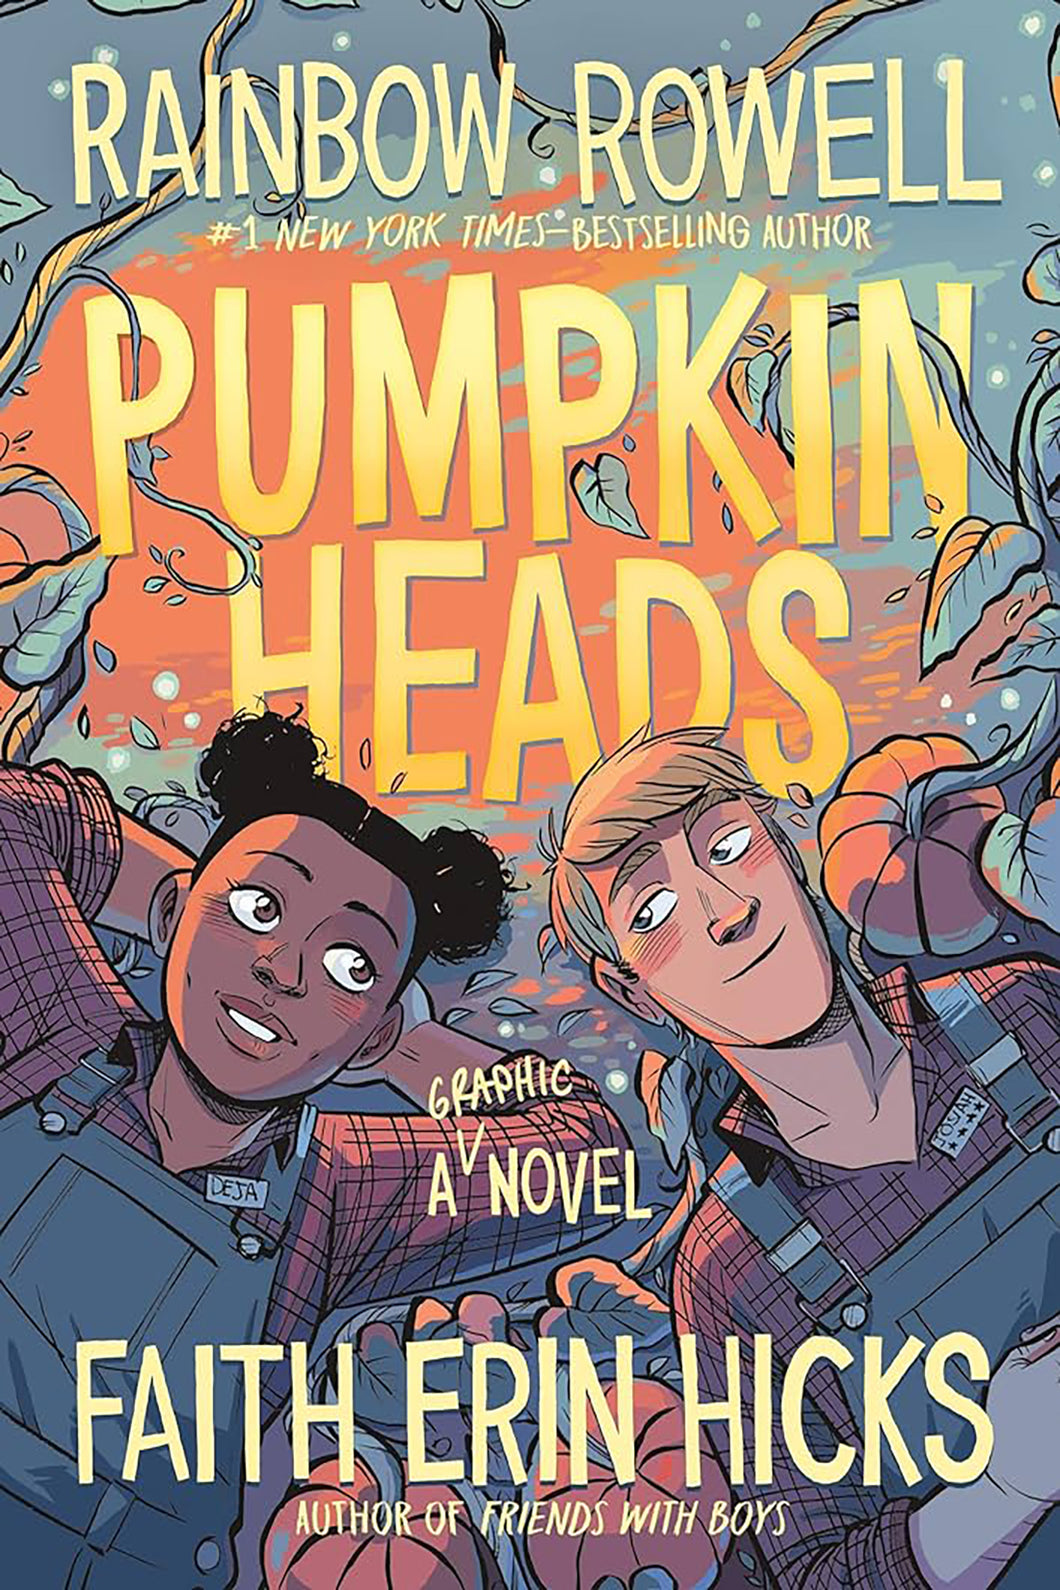 Pumpkinheads by Rainbow Rowell / Hardcover or Paperback - NEW BOOK (English or Spanish)